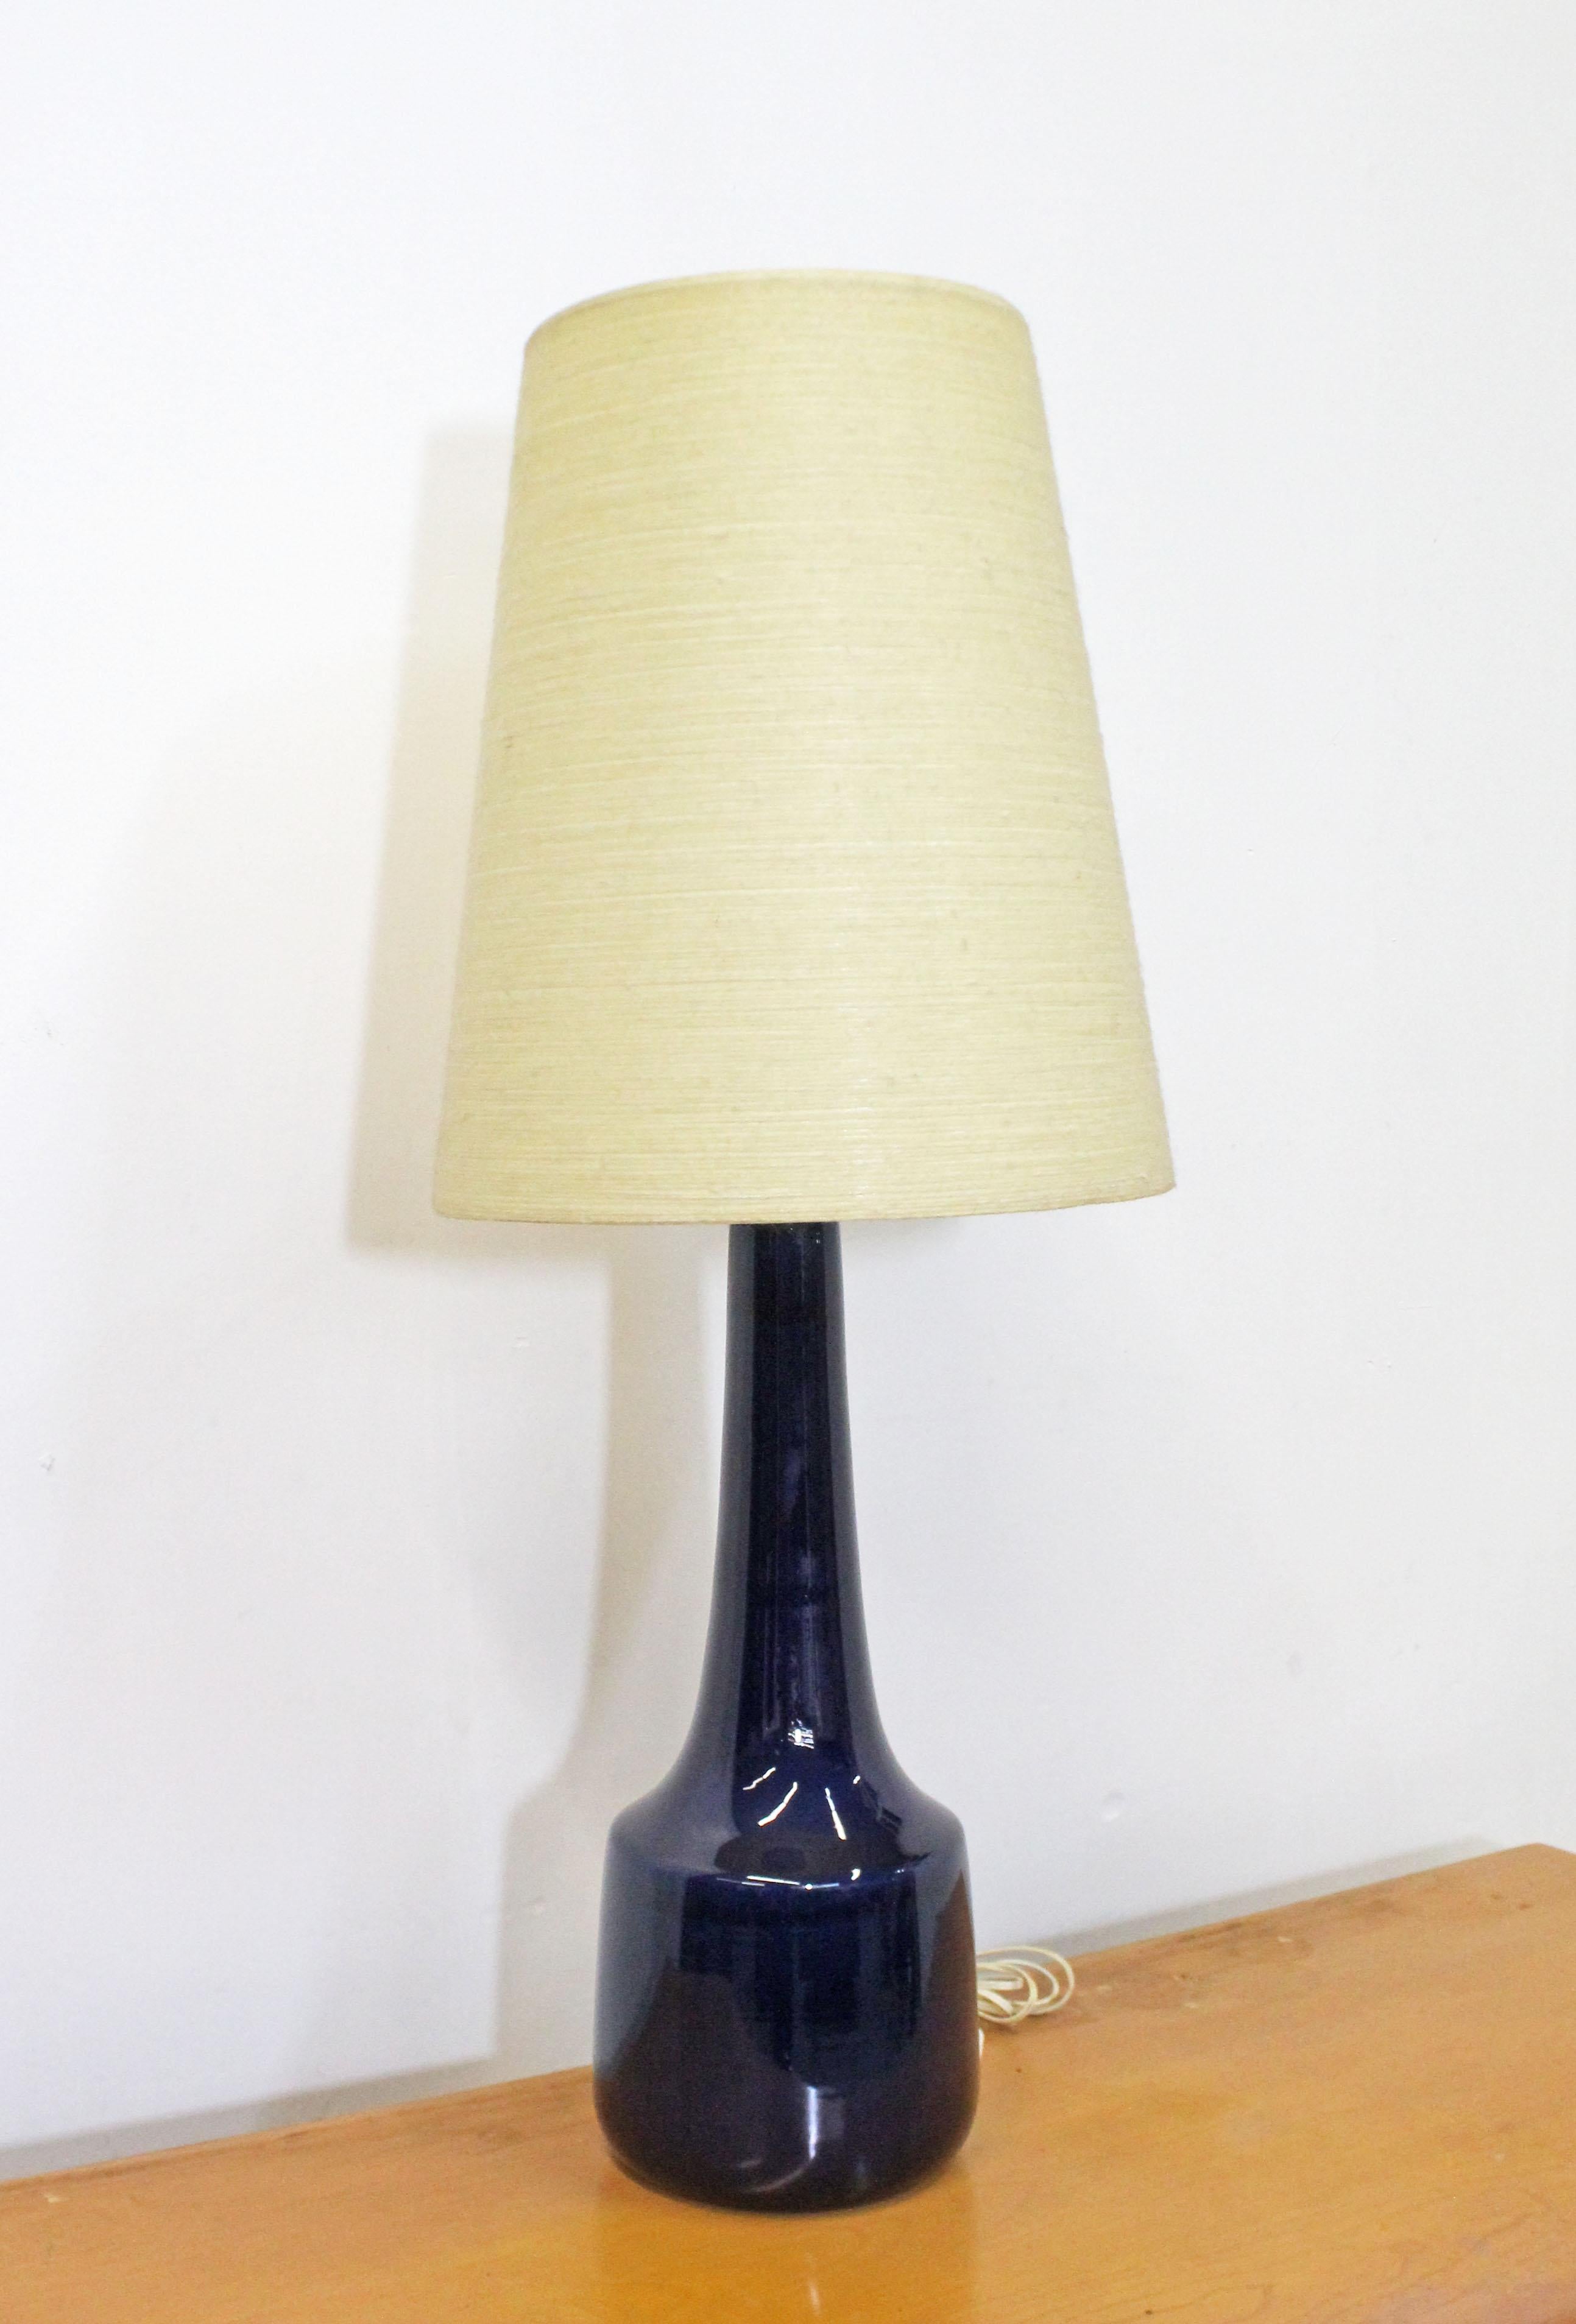 Offered is a gorgeous vintage table lamp by Lotte & Gunnar Bostlund. This lamp has a molded ceramic blue base and comes with its original fiberglass & string shade. It is in excellent vintage condition, has been tested and works. A great piece to